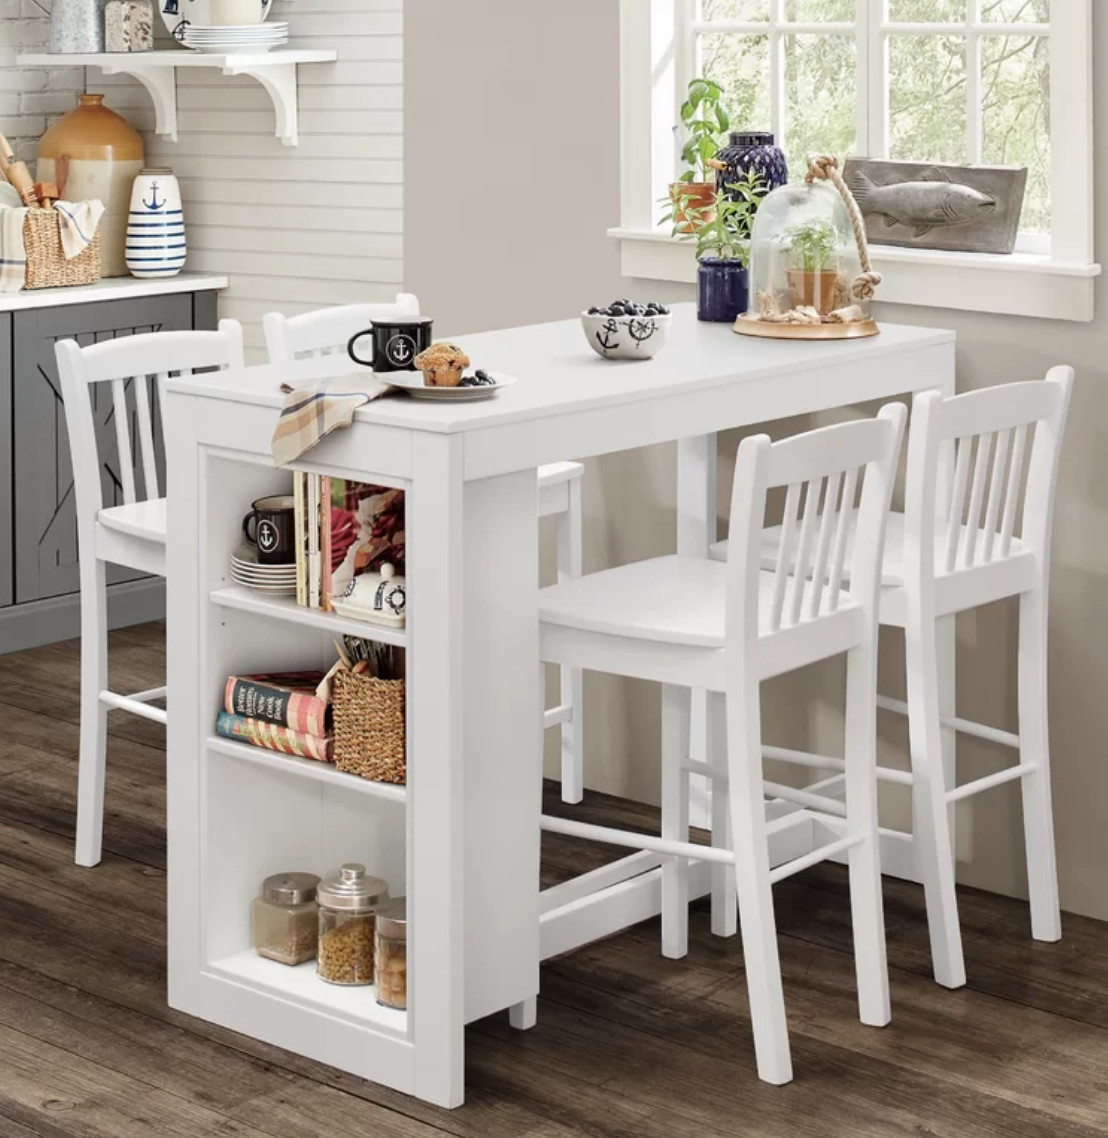 High table and chairs – a good option for small spaces